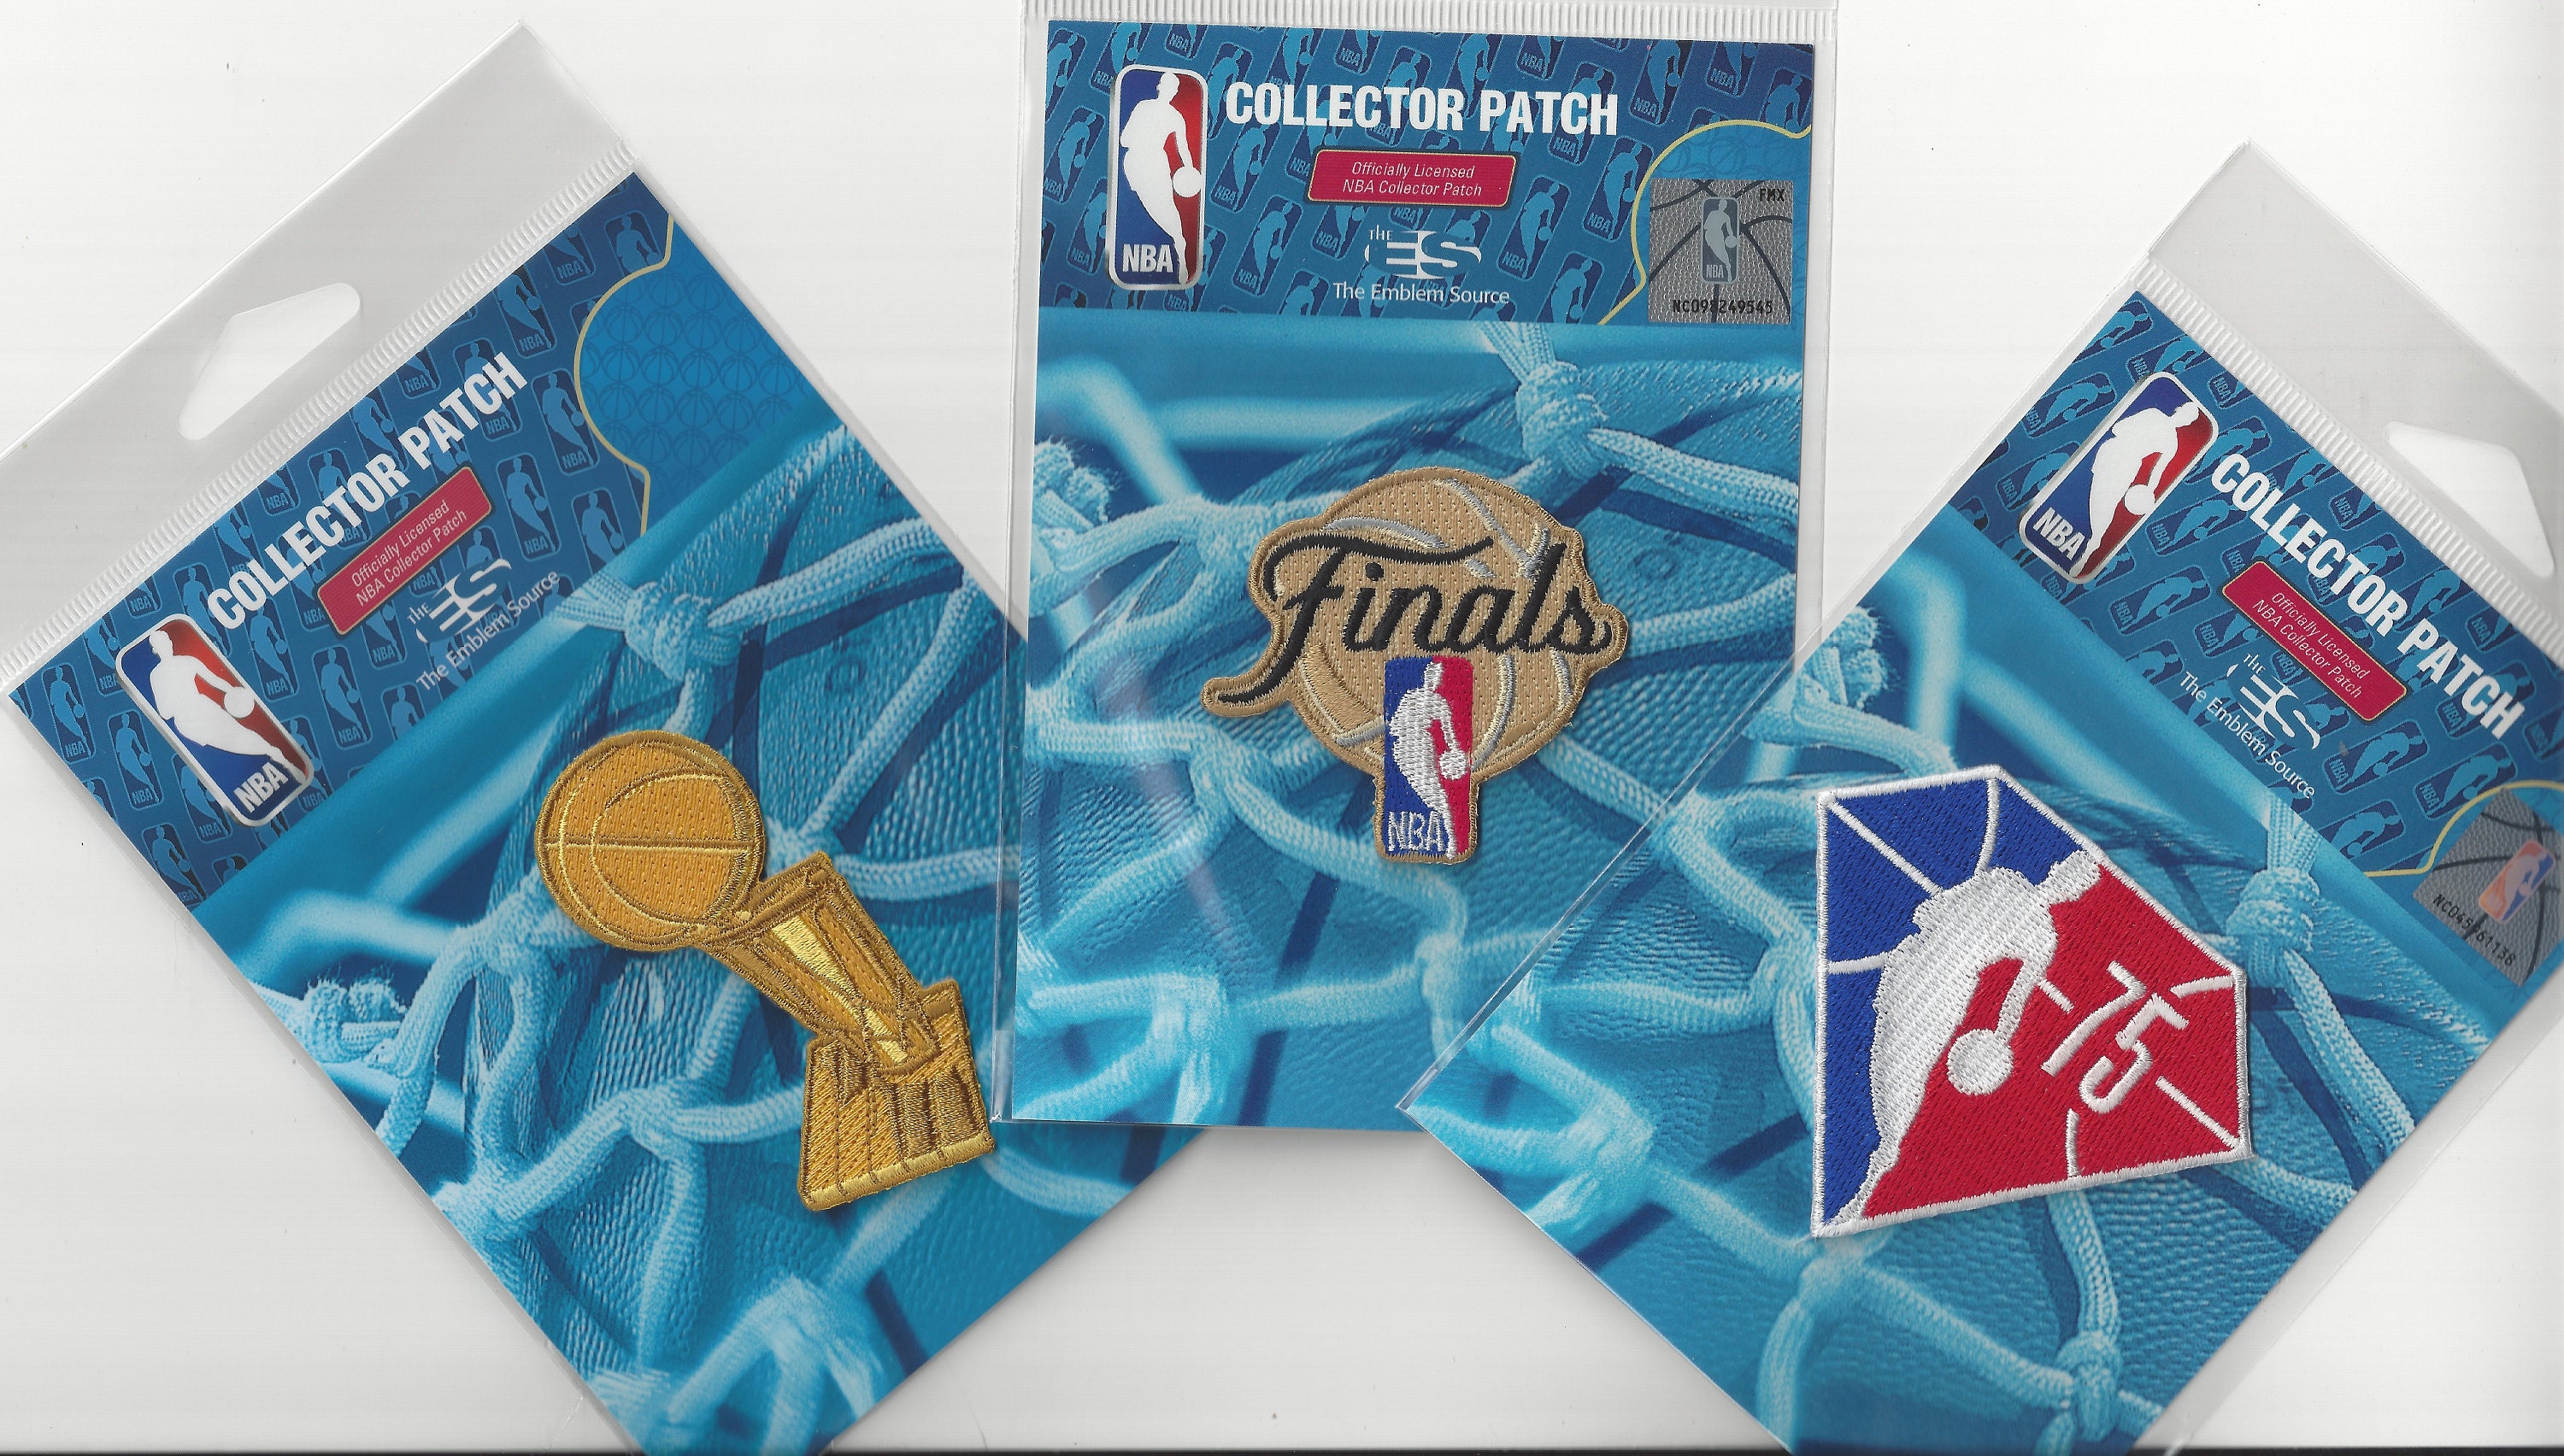 Basketball Jersey Patches NBA Finals & Trophy Iron on Patch 